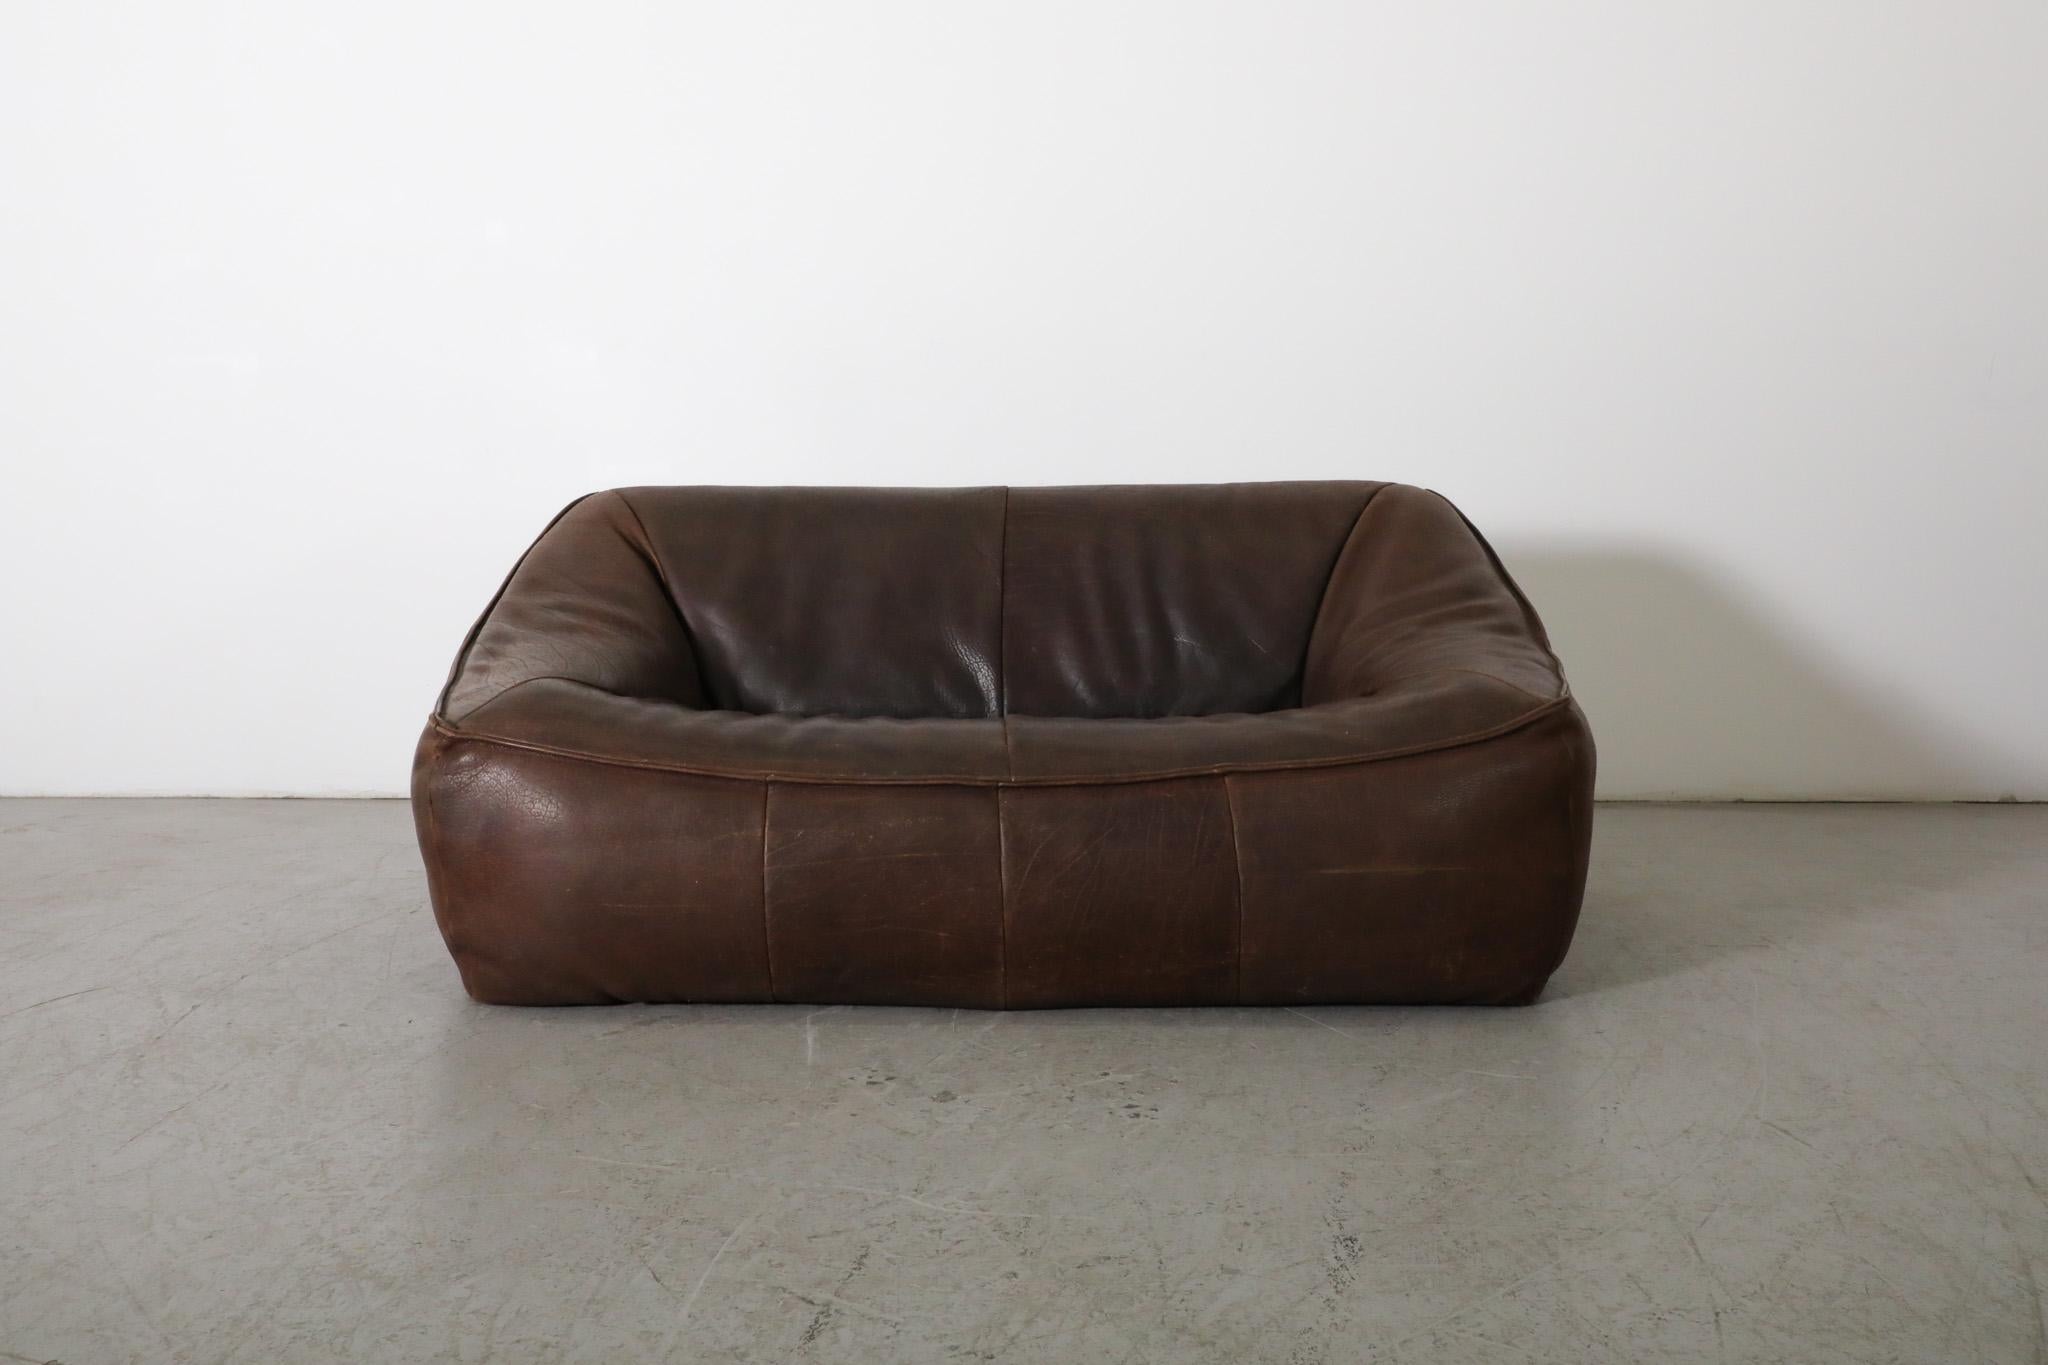 Mid-Century 'Ringo' loveseat designed by Gerard Van Den Berg for Montis. Soft form sofa with thick, luxurious leather. manufactured by Montis and designed by the company's co-founder Gerard van den Berg. A visually elegant and timeless piece of